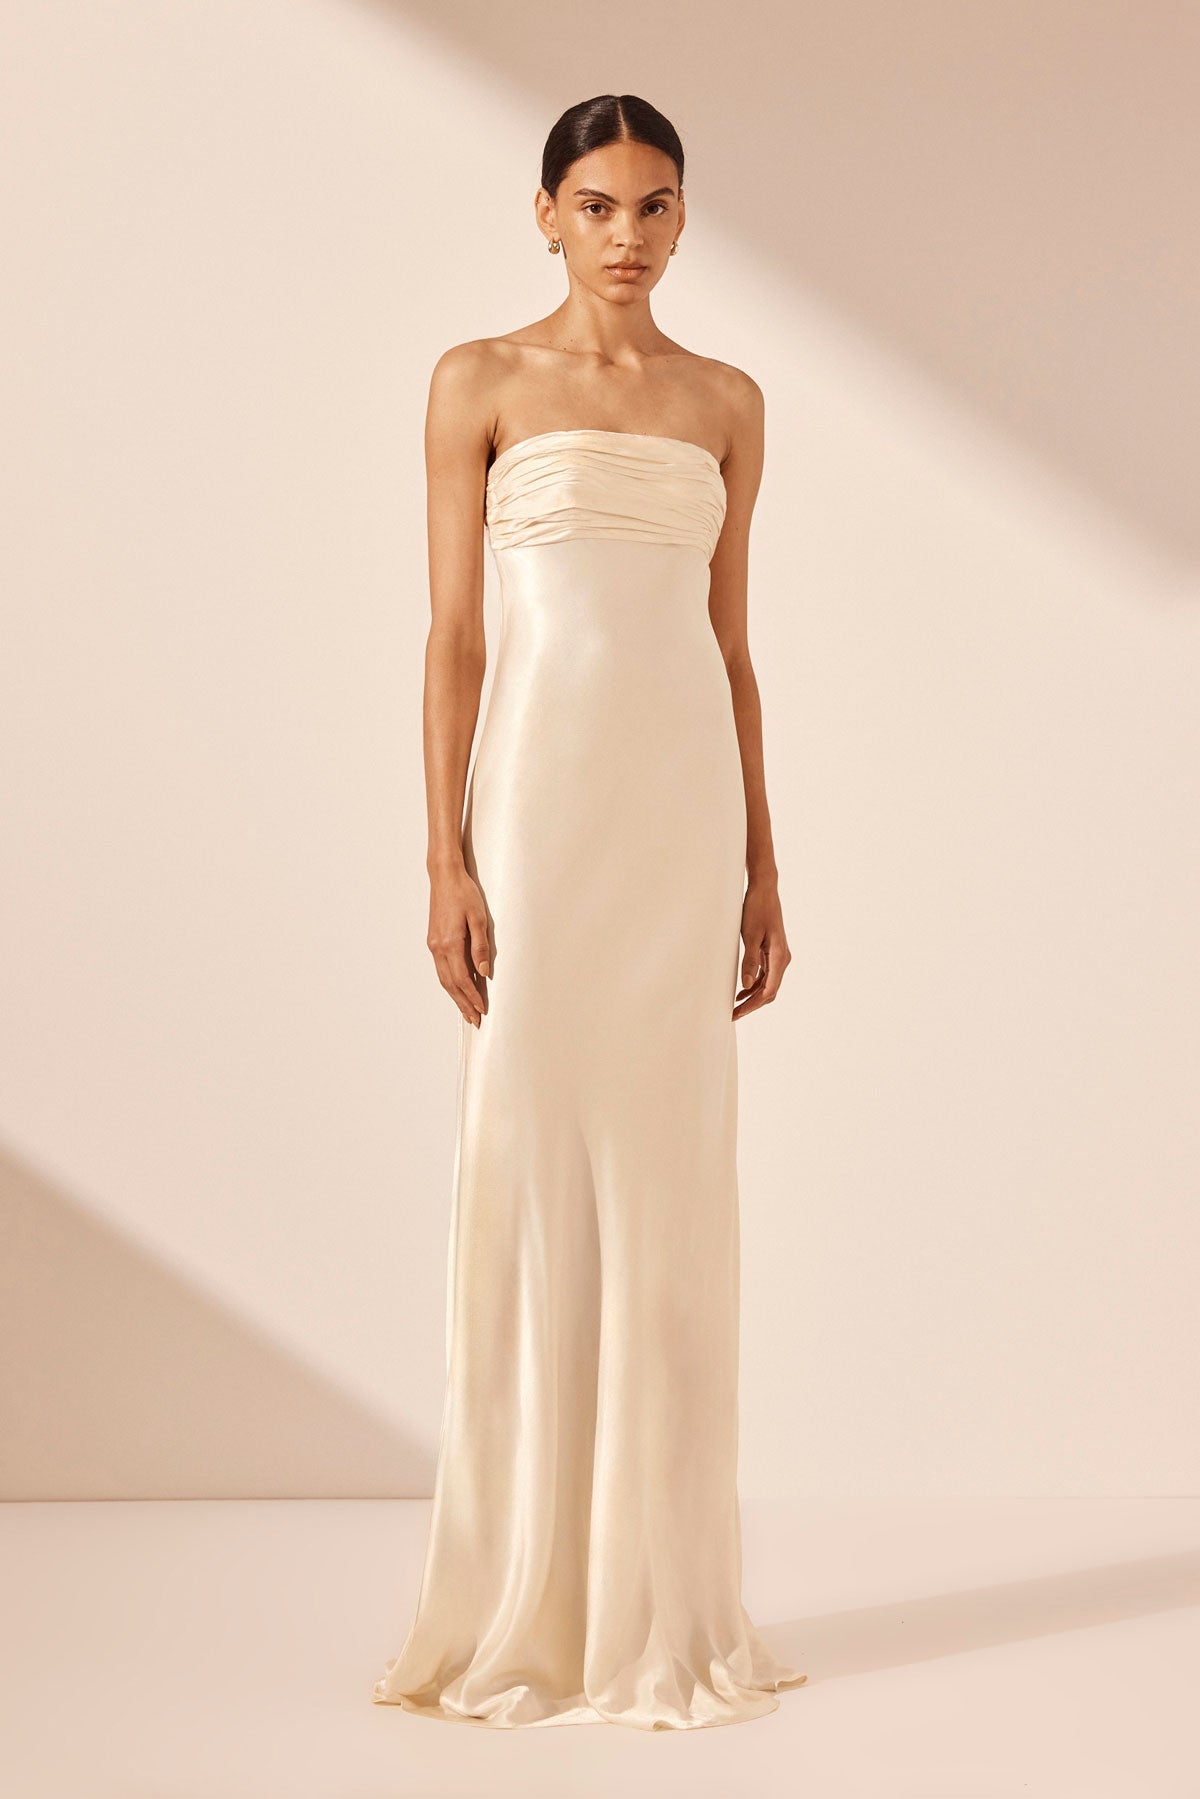 STRAPLESS OPEN BACK MAXI DRESS – Parker and Poppy